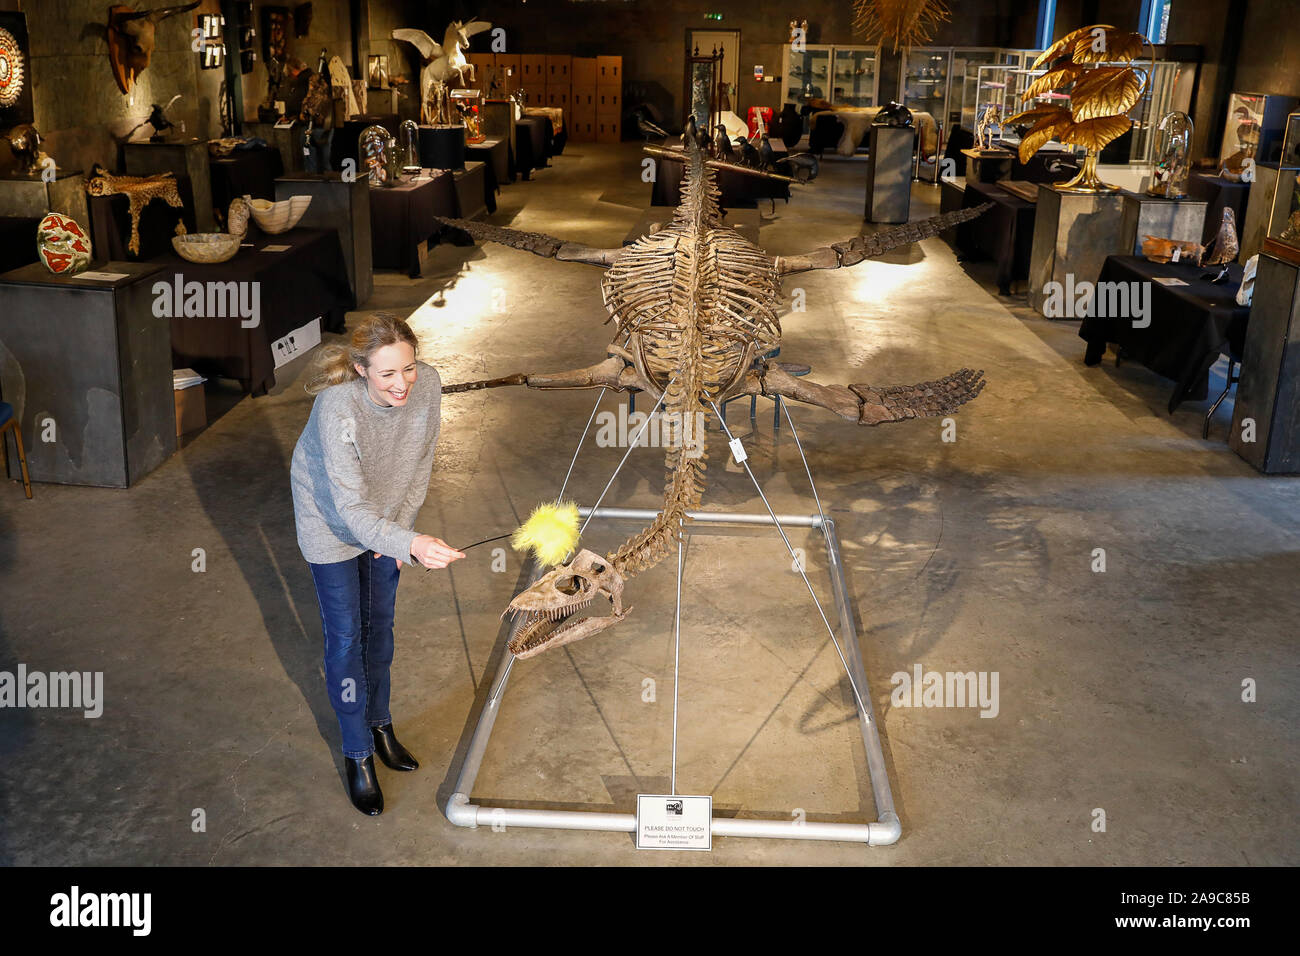 Stane Street, Billingshurst. 14th November 2019. A set of very rare artefacts for sale at Summer's Place Auctions in Billingshurst, West Sussex, as part of their ‘Evolution' collection. Lindsay Hoadley of Summer's Place Auctions Ltd poses with an extremely rare Plesiosaur, Cryptclidus eumymerus, which is expected to fetch £25000 to £40000 at auction. This specimen was found in Oxford clay near Peterborough and dates to the Jurassic period. Credit: james jagger/Alamy Live News Stock Photo